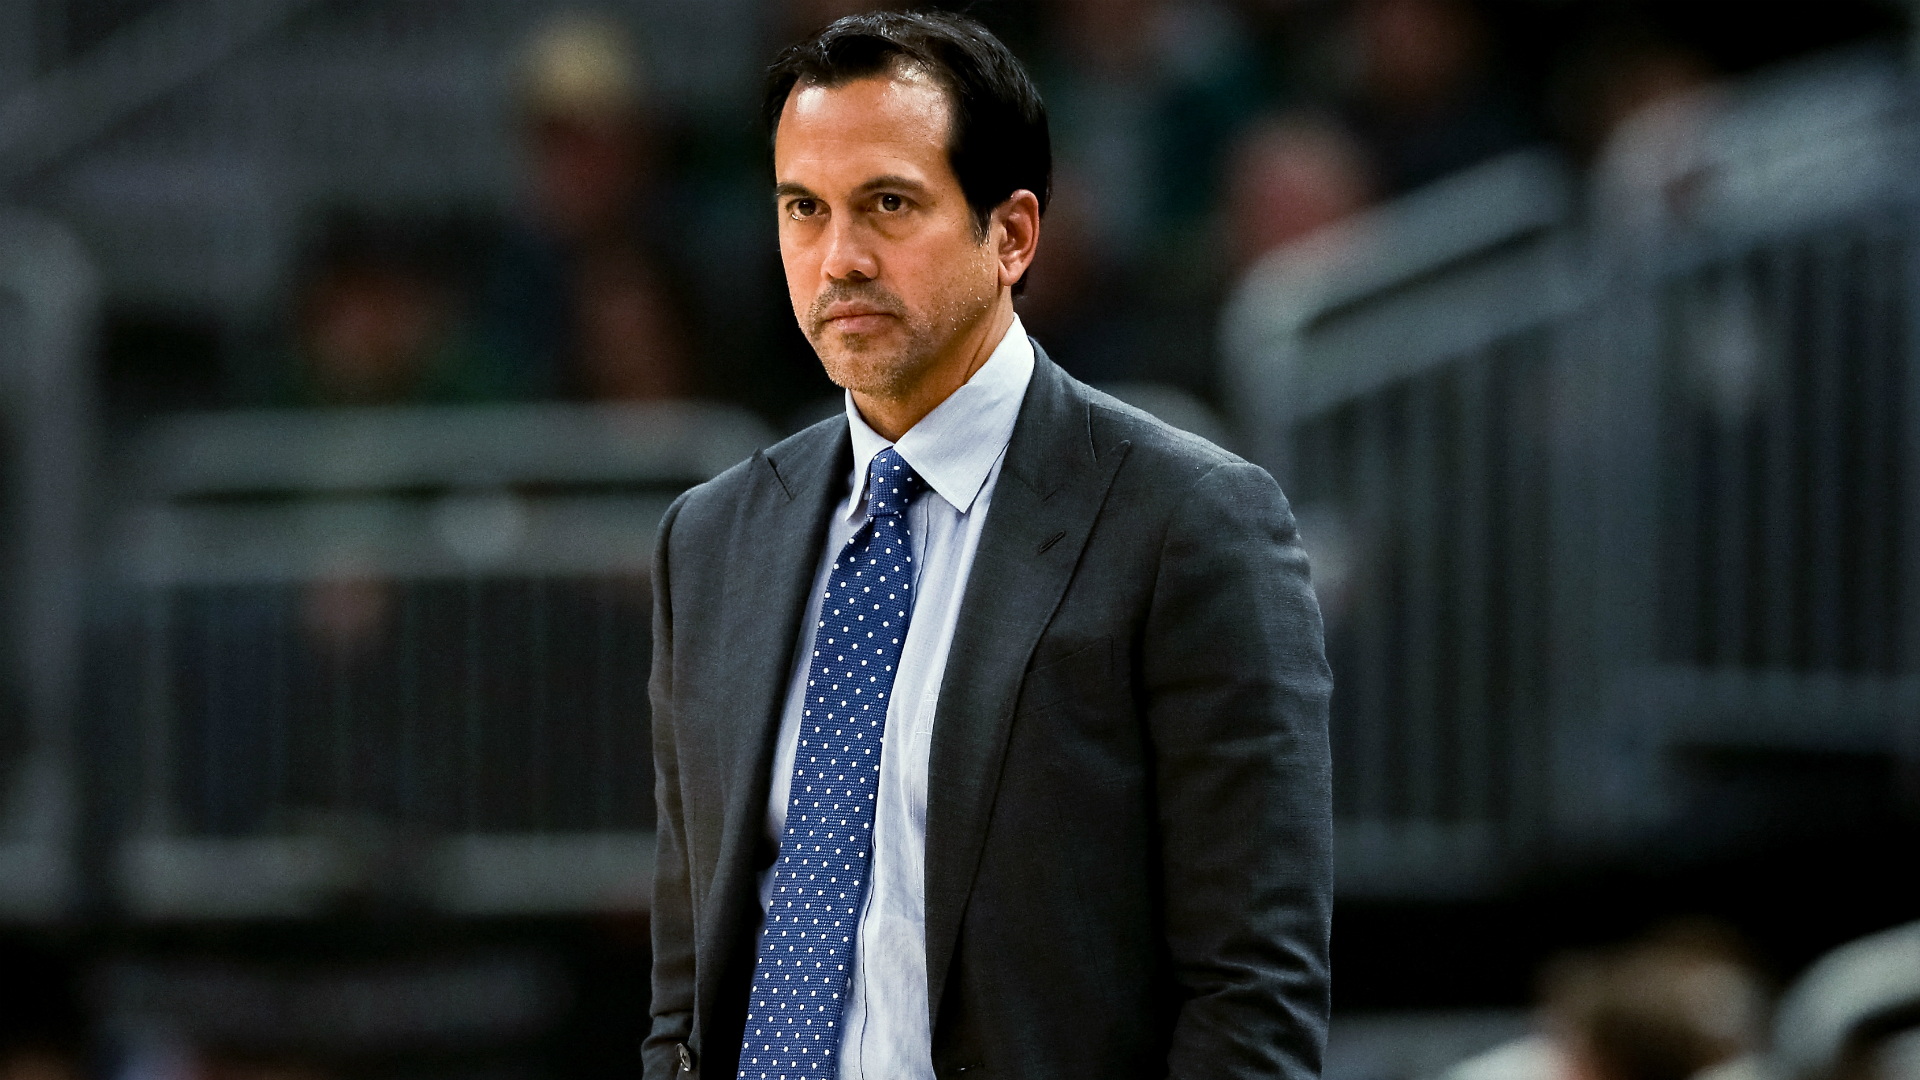 Erik Spoelstra discussed the 2019-20 NBA season, which is set to restart in Florida next month.